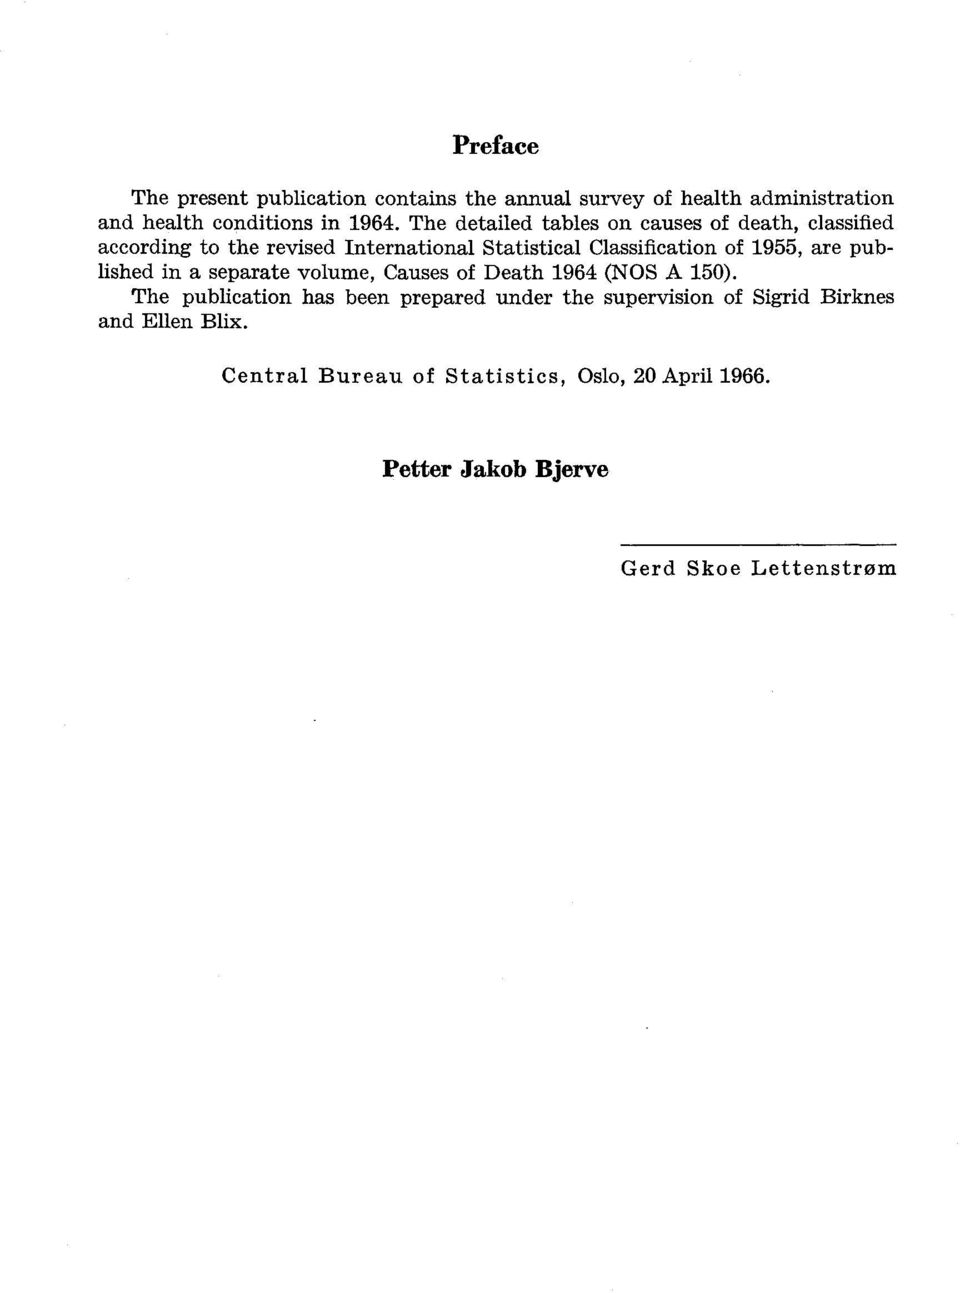 according to the revised International Statistical Classification of 1955, are published in a separate volume, Causes of